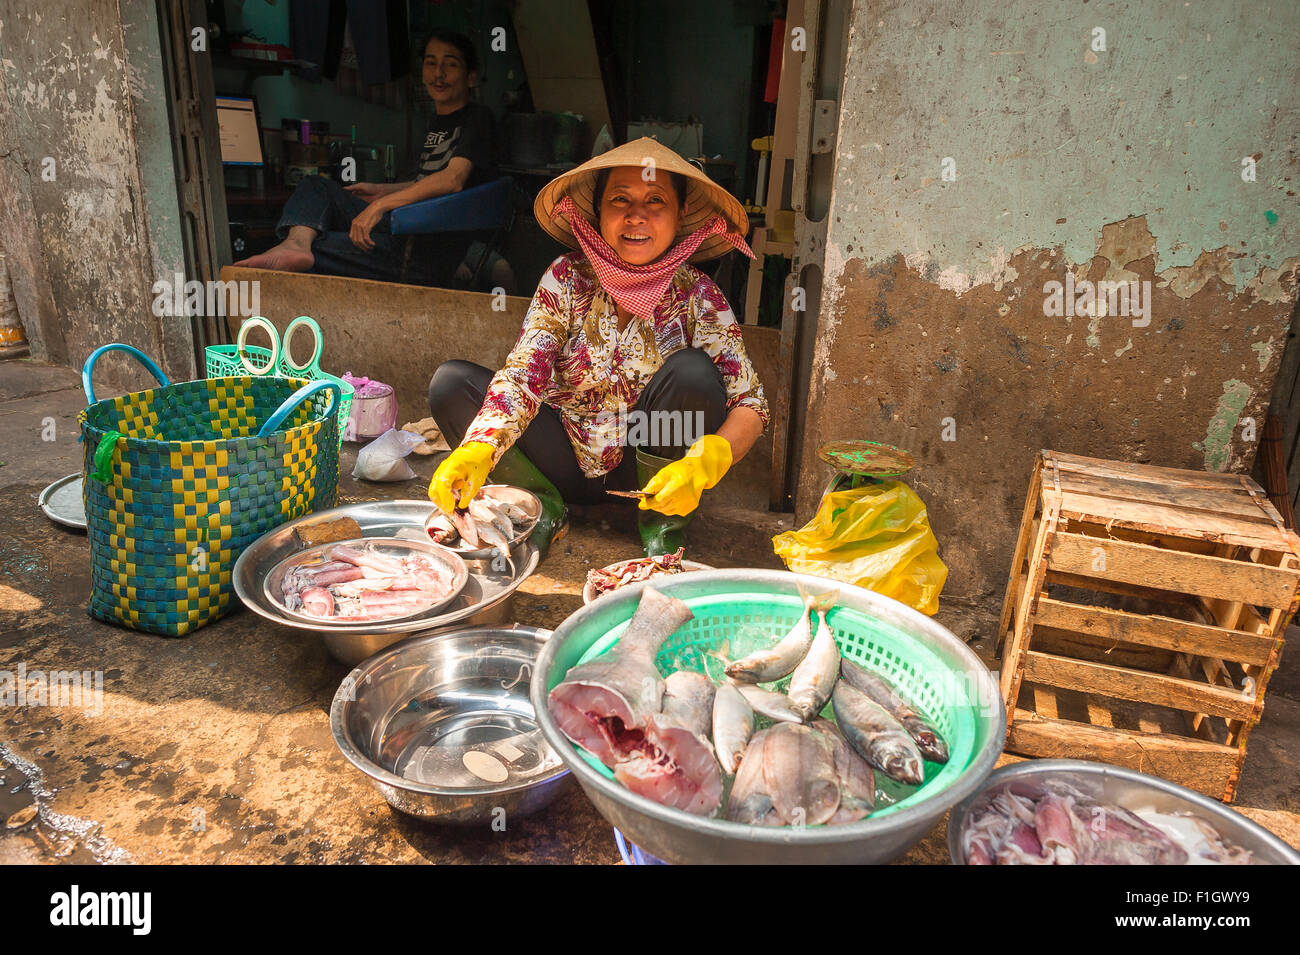 Vietnam woman smiling, in Ho Chi Minh City a Vietnamese woman smiles as she sets out her fish stall on a sidewalk near the Binh Tay market. Stock Photo